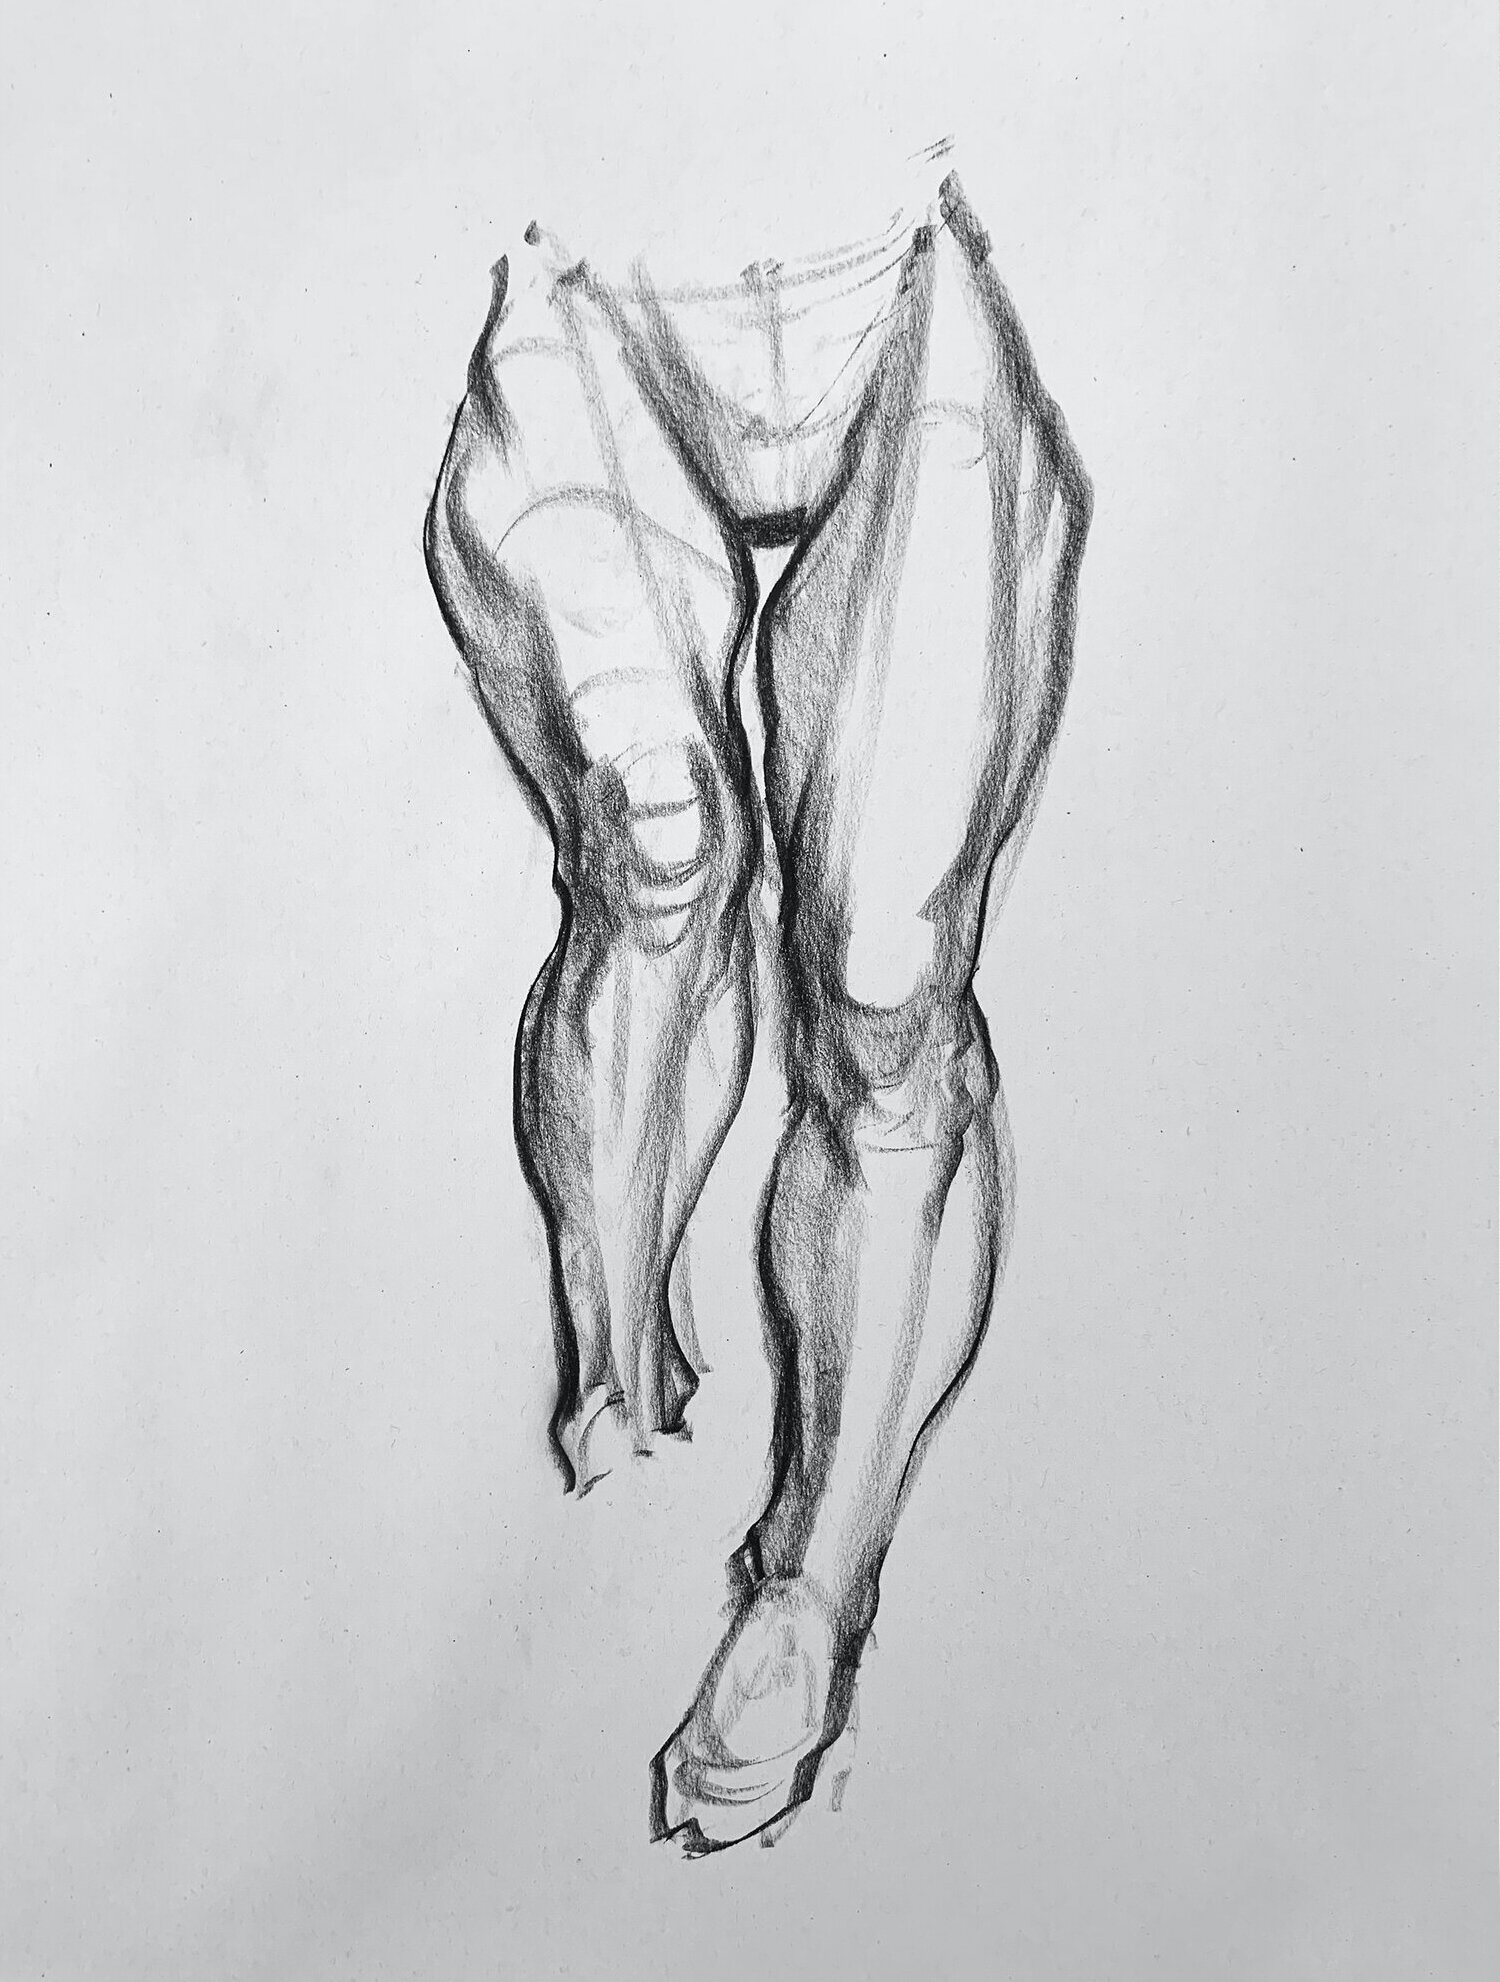 Anatomical approach to figure drawing: the basics can be enough